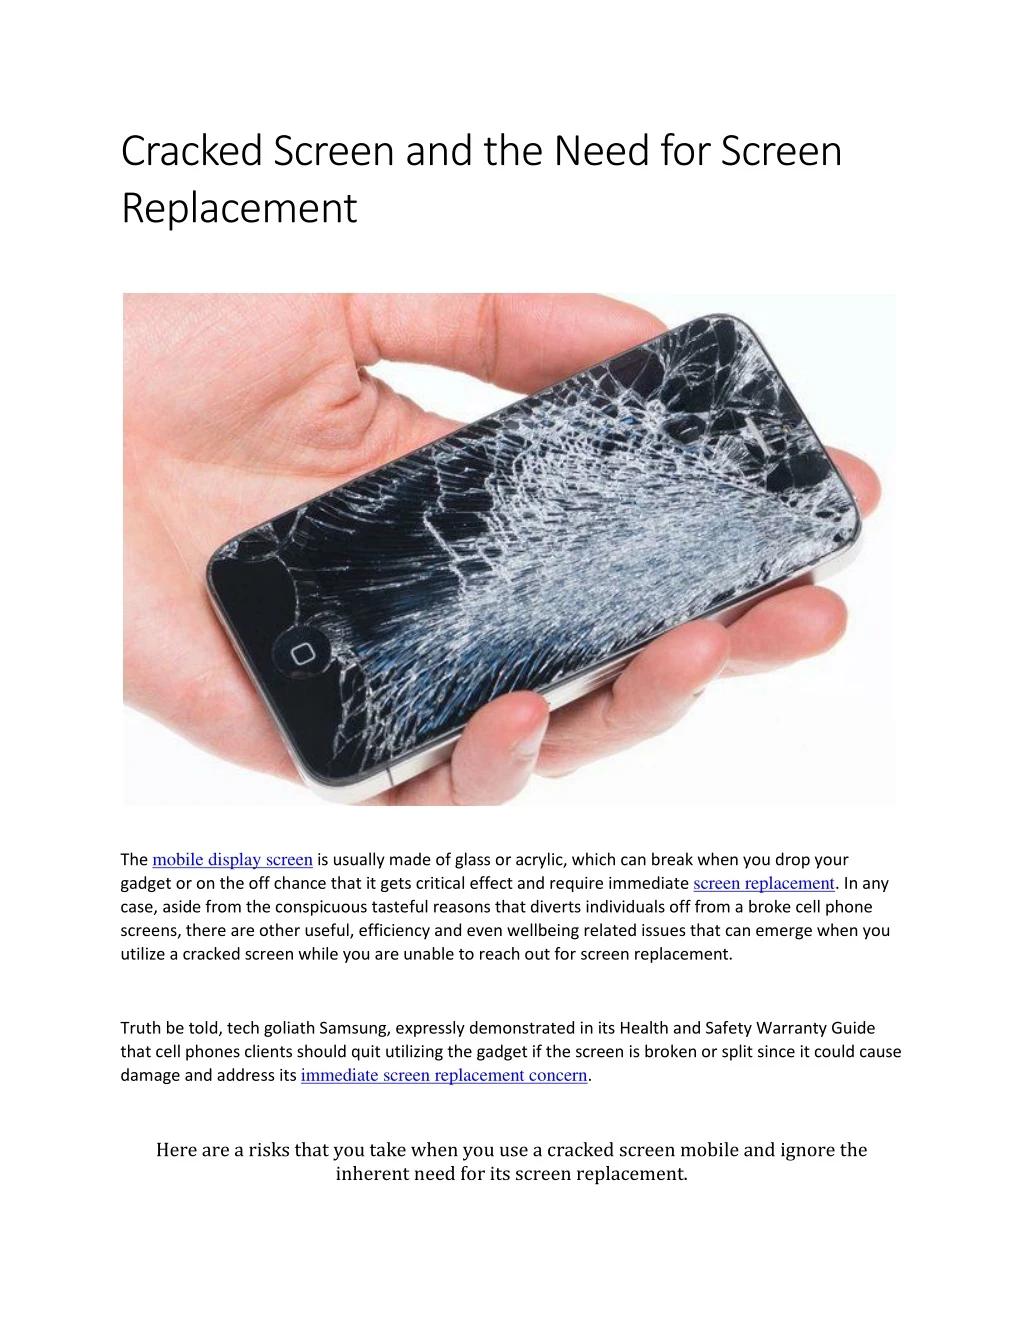 cracked screen and the need for screen replacement